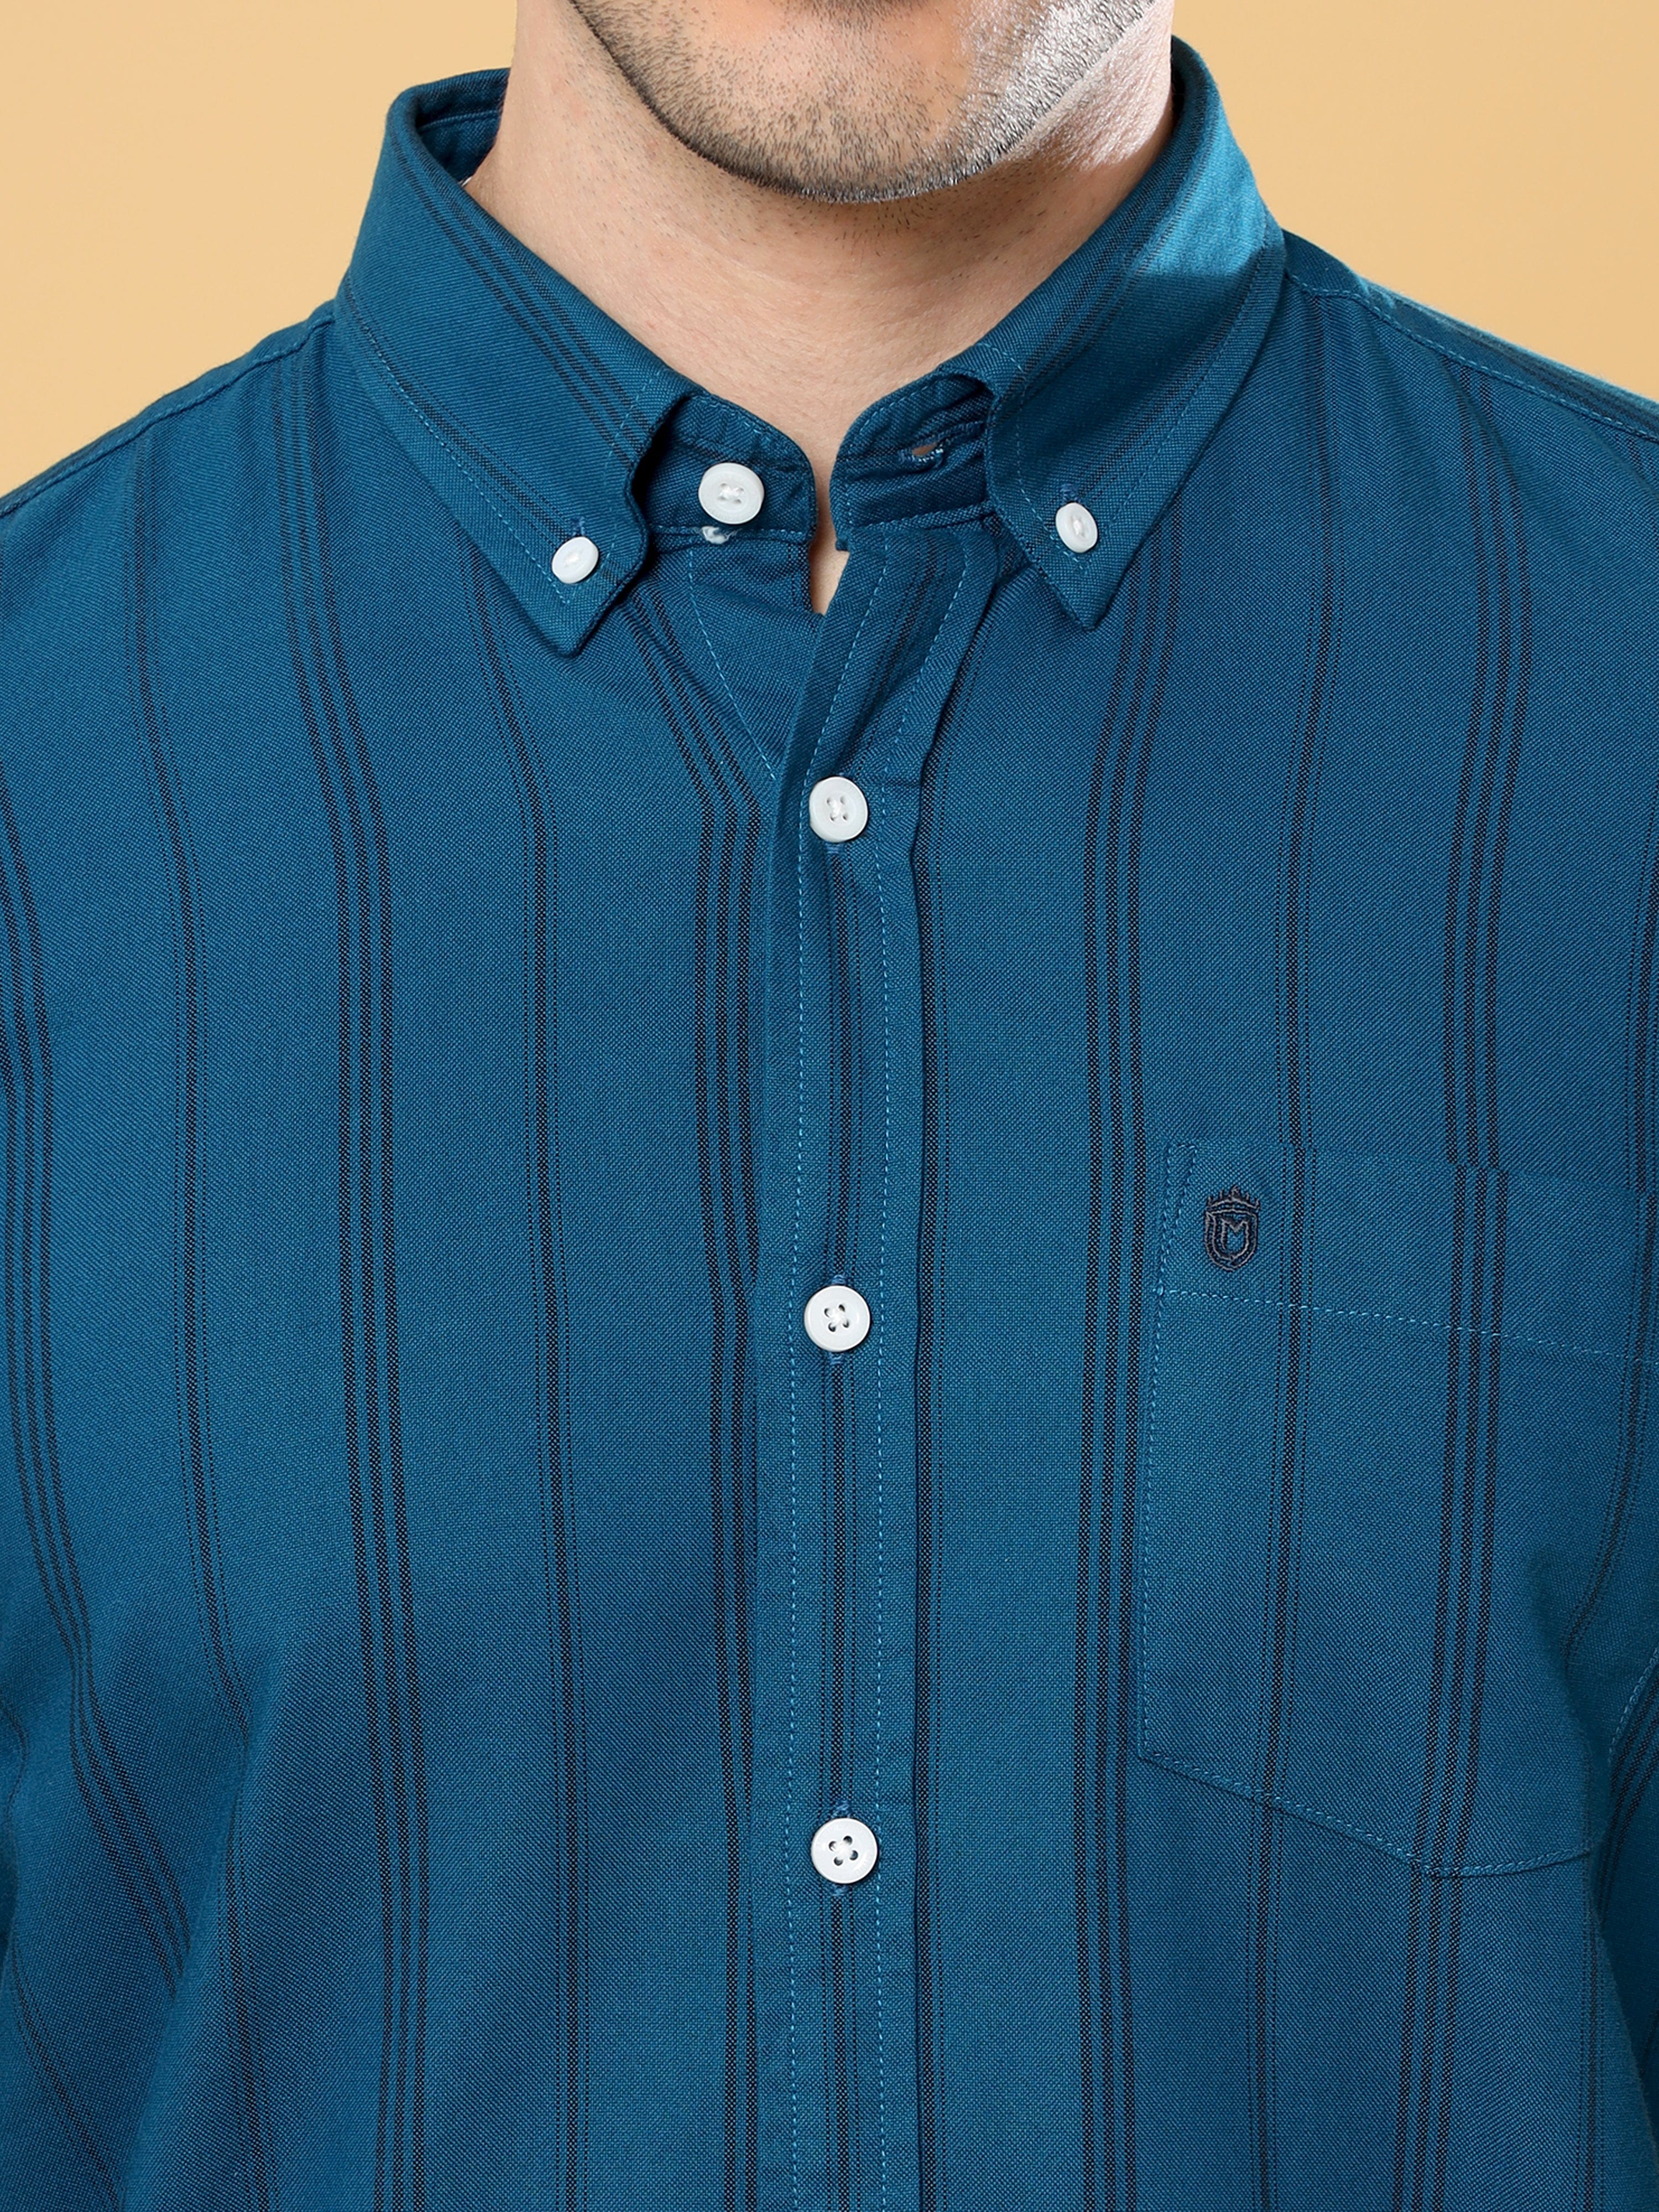 Buy Latest Premium Oxford Long Striped Shirt OnlineRs. 1099.00